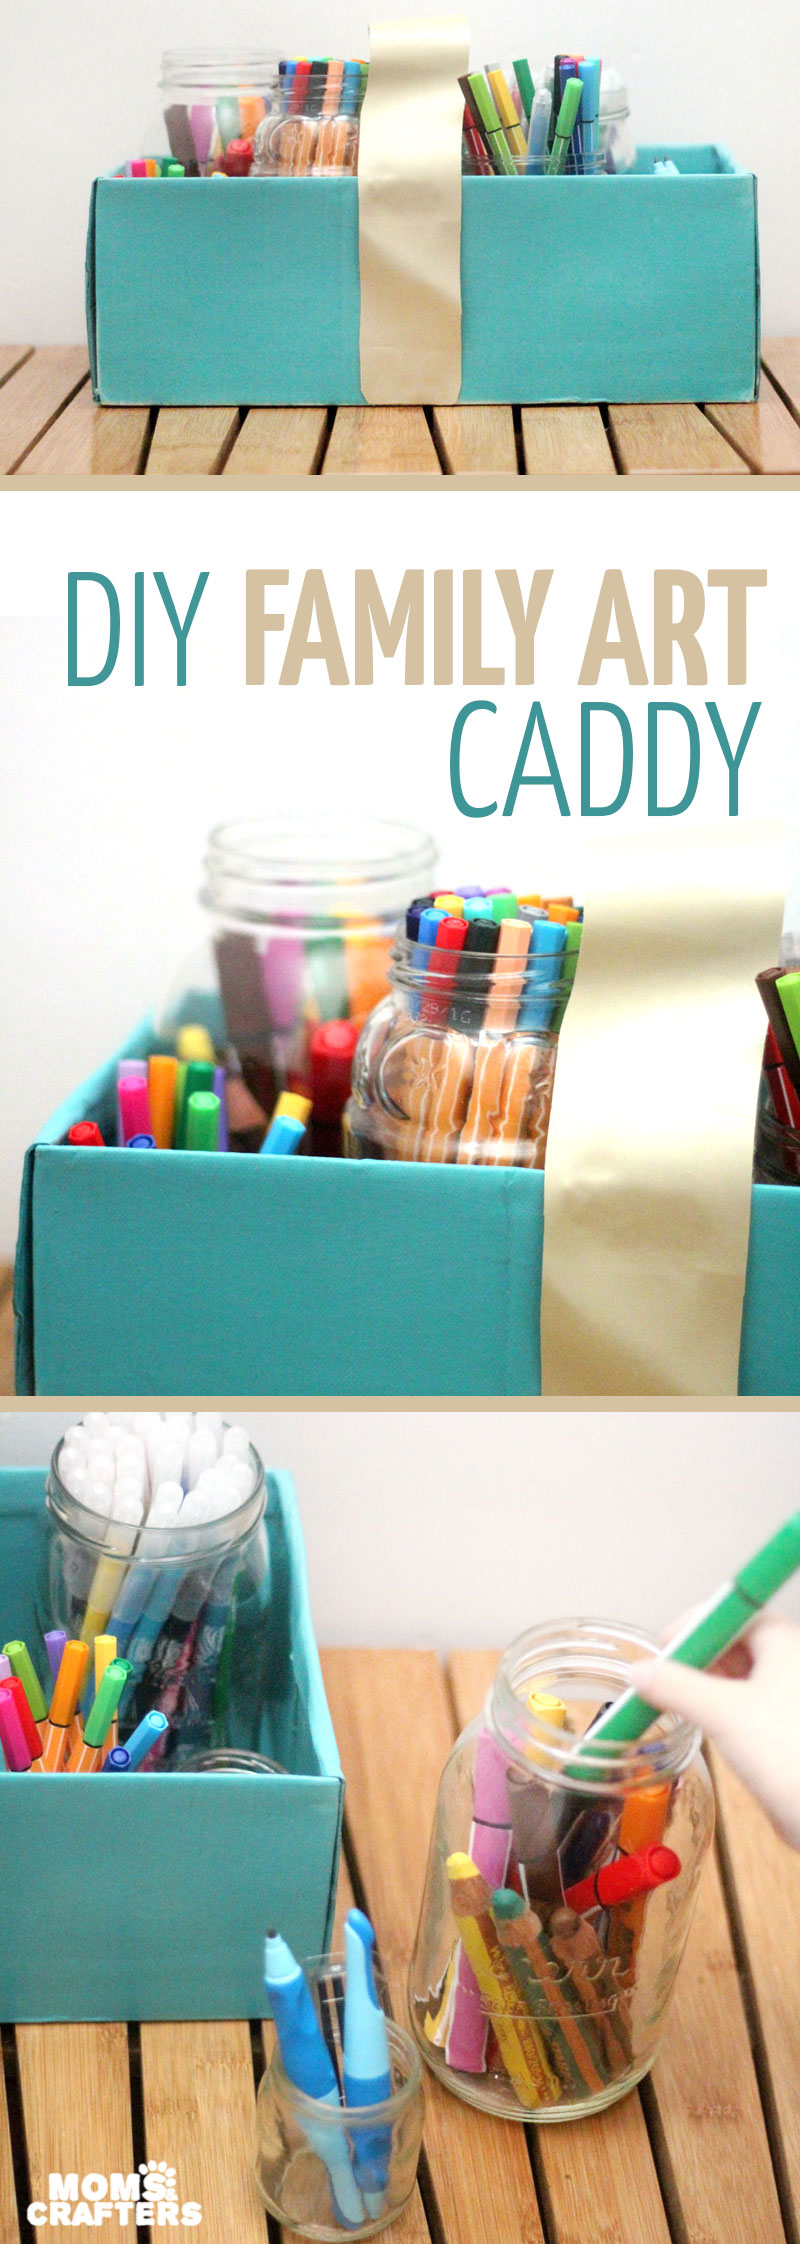 Make a super easy upcycled DIY marker storage caddy to transport the entire family's art supplies from the closet to the table in a usable bin! The jars can be removed individually to easily set up and clean up a family art station with coloring supplies for kids and adults. This recylced cardboard box and jar craft is so easy to make, and is an awesome craft room organization hack. 